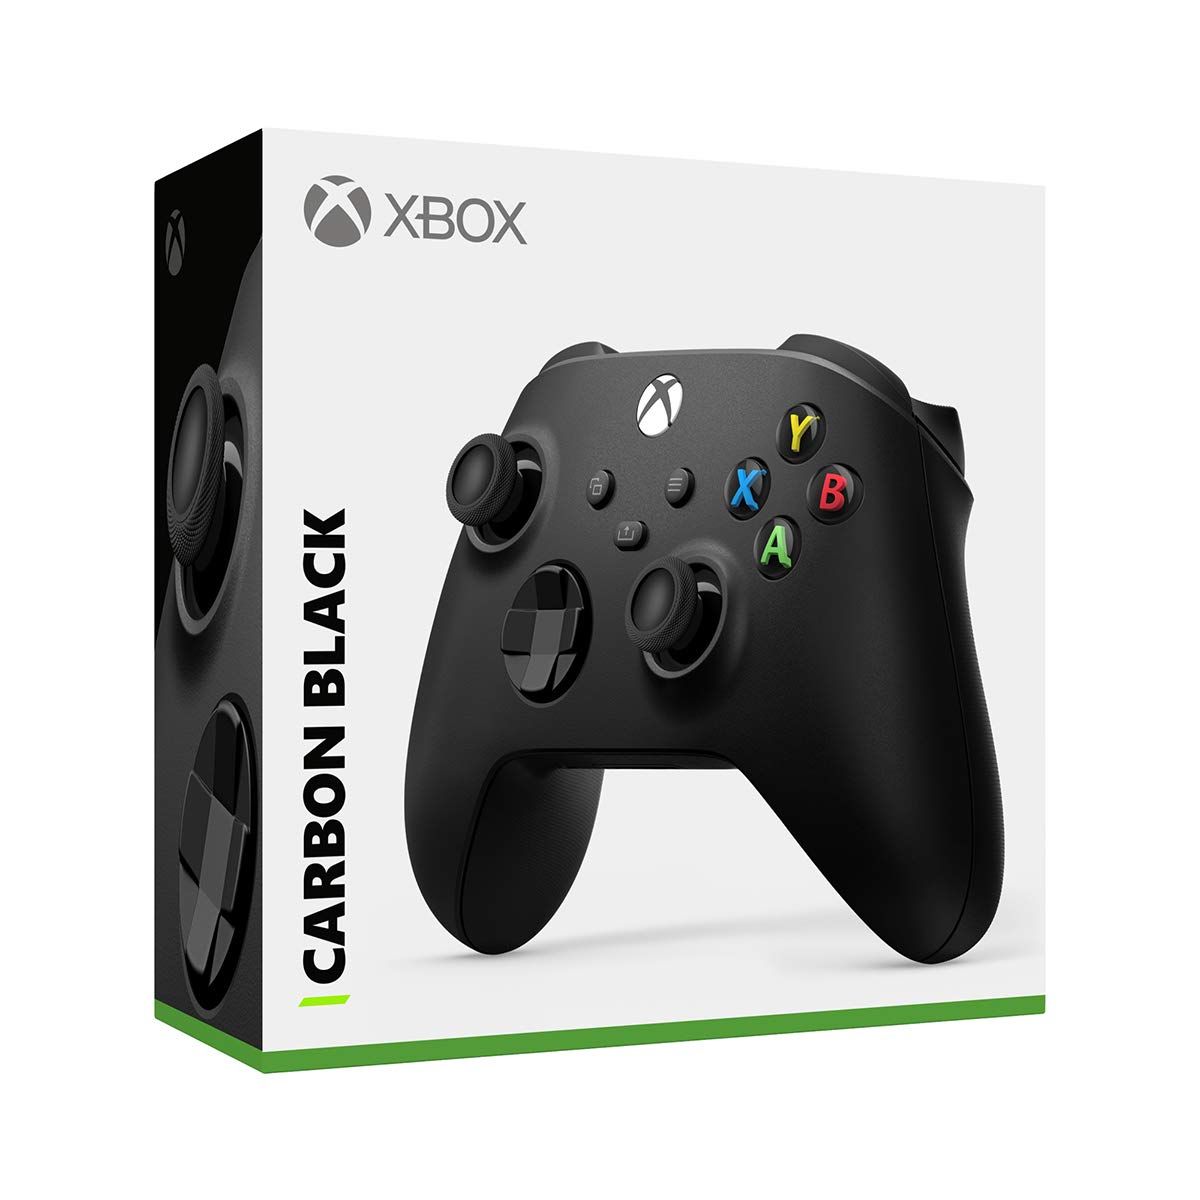 Xbox Core Controller box packaging